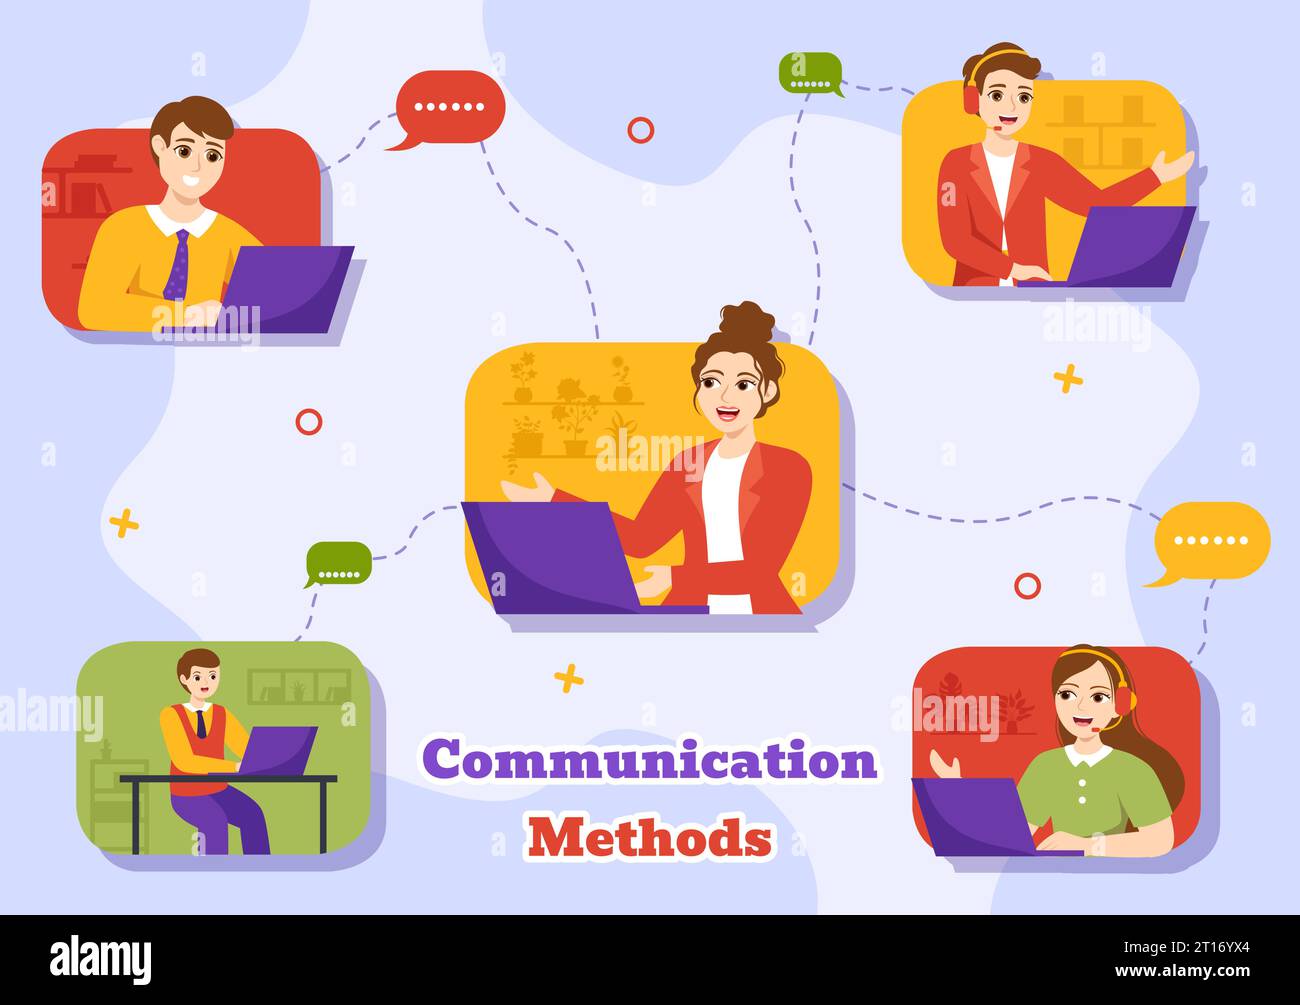 Communication Methods Vector Illustration with Team Referral Marketing, Project Management, Social Networks and Public Relations in Flat Background Stock Vector